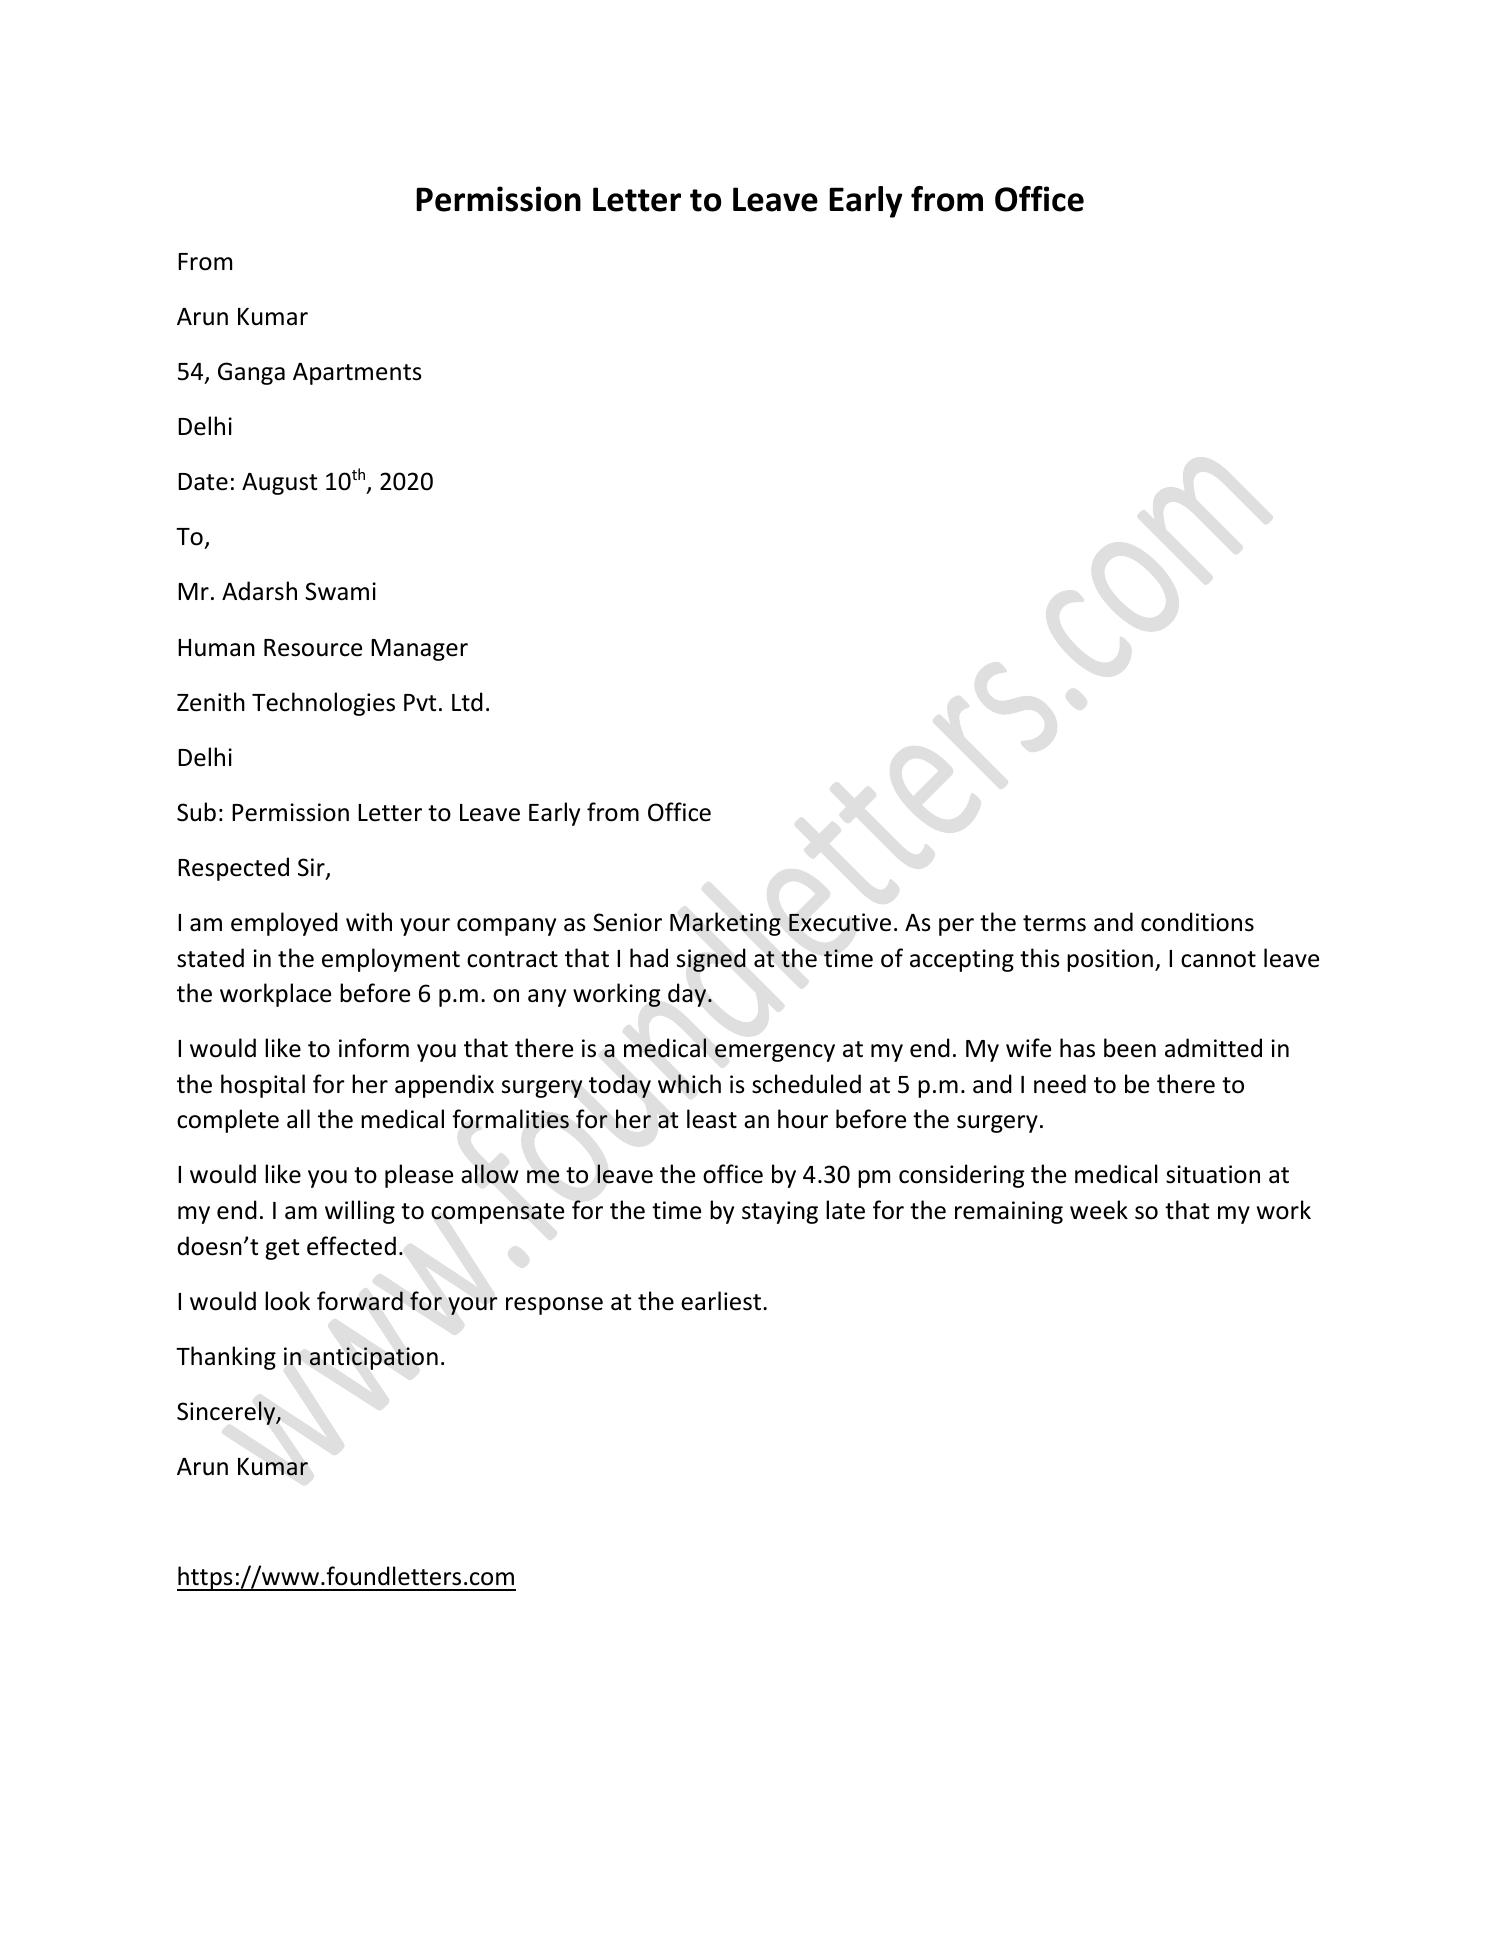 permission-letter-to-leave-early-from-office-pdf-docdroid